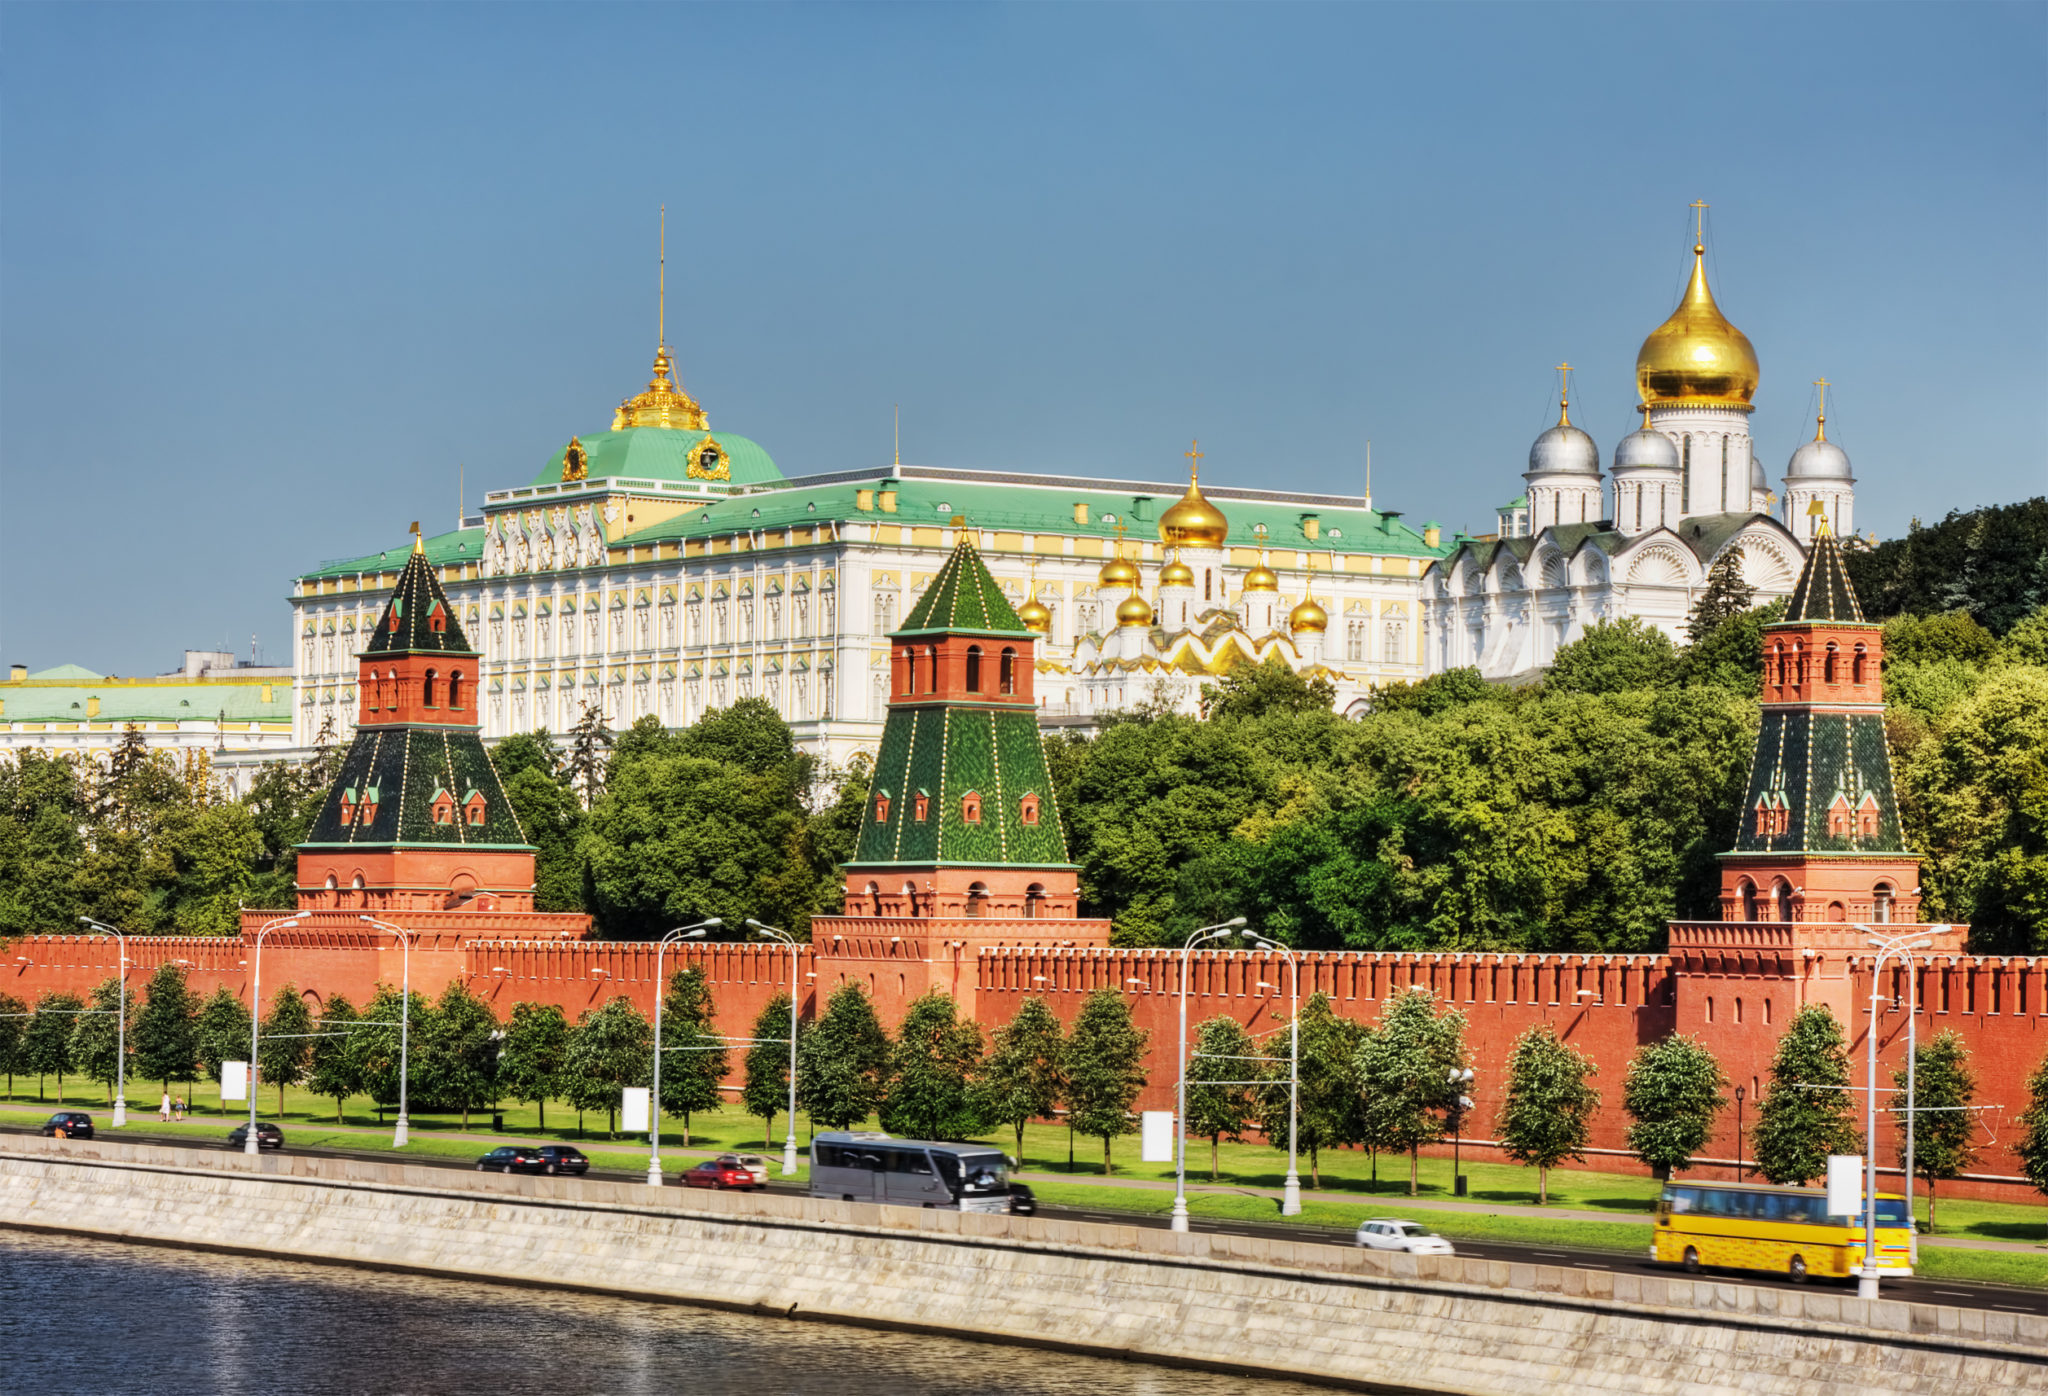 the Moscow Kremlin and the waterfront. Moscow. Russia